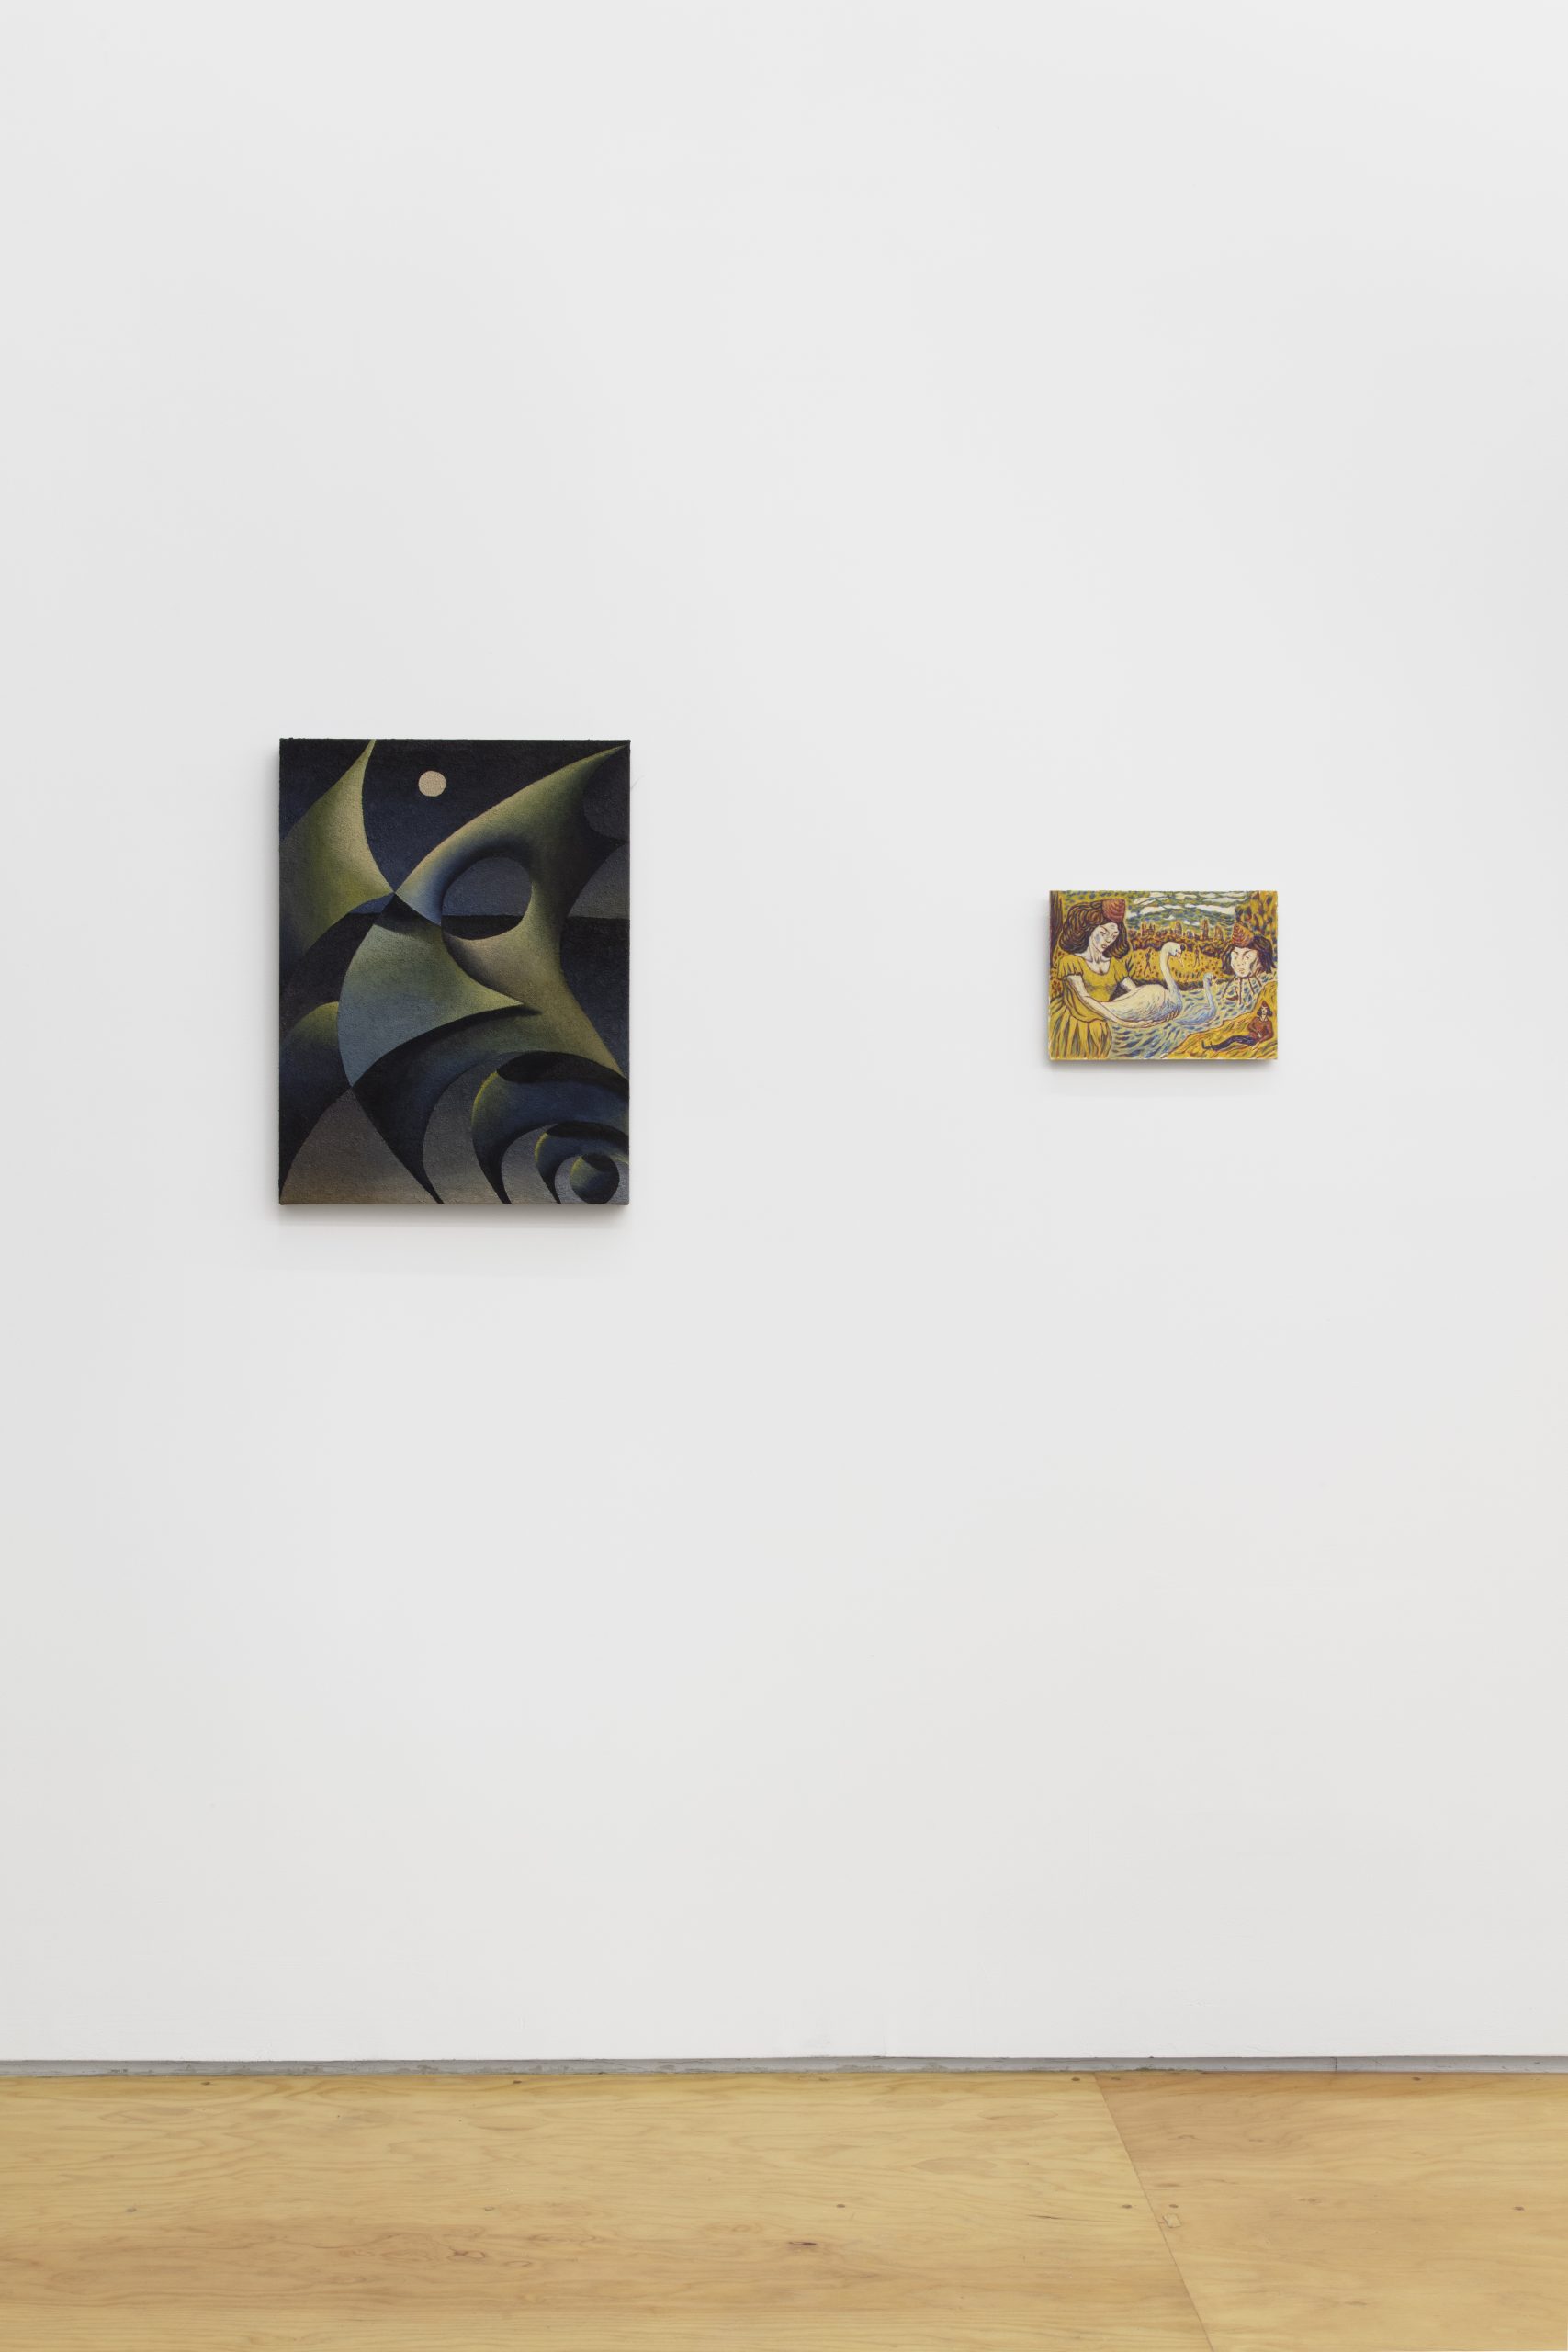 installation view with two paintings